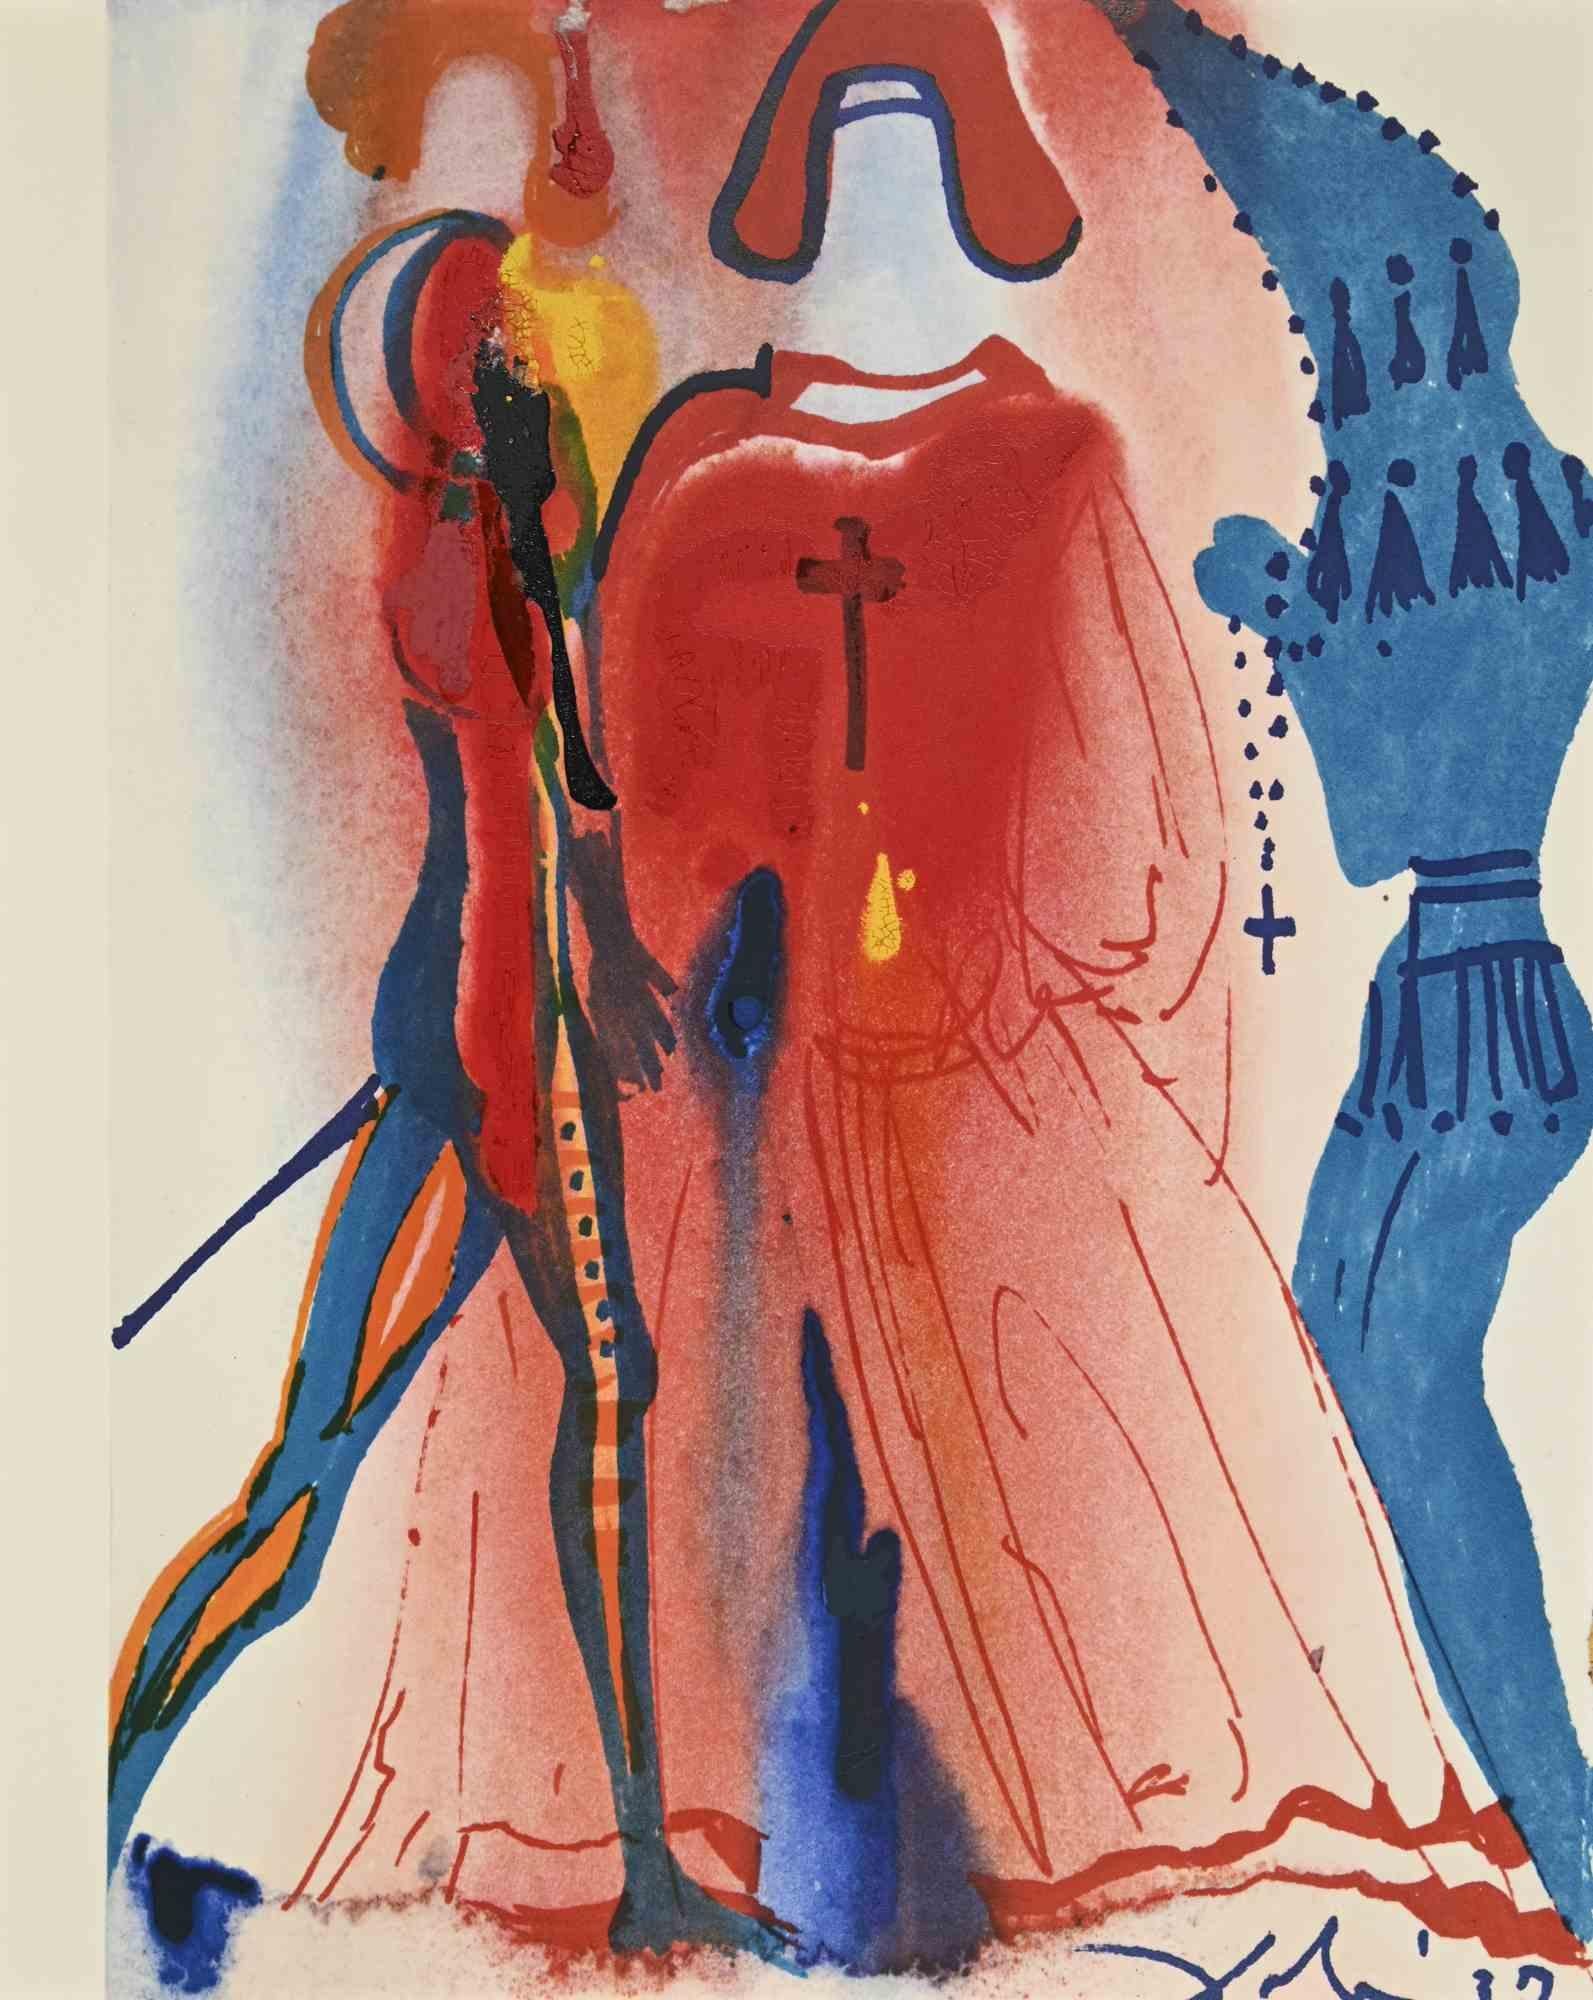 Salvador Dalí Print - Act III, Scene I - From “Romeo and Juliet” - Lithograph-1975